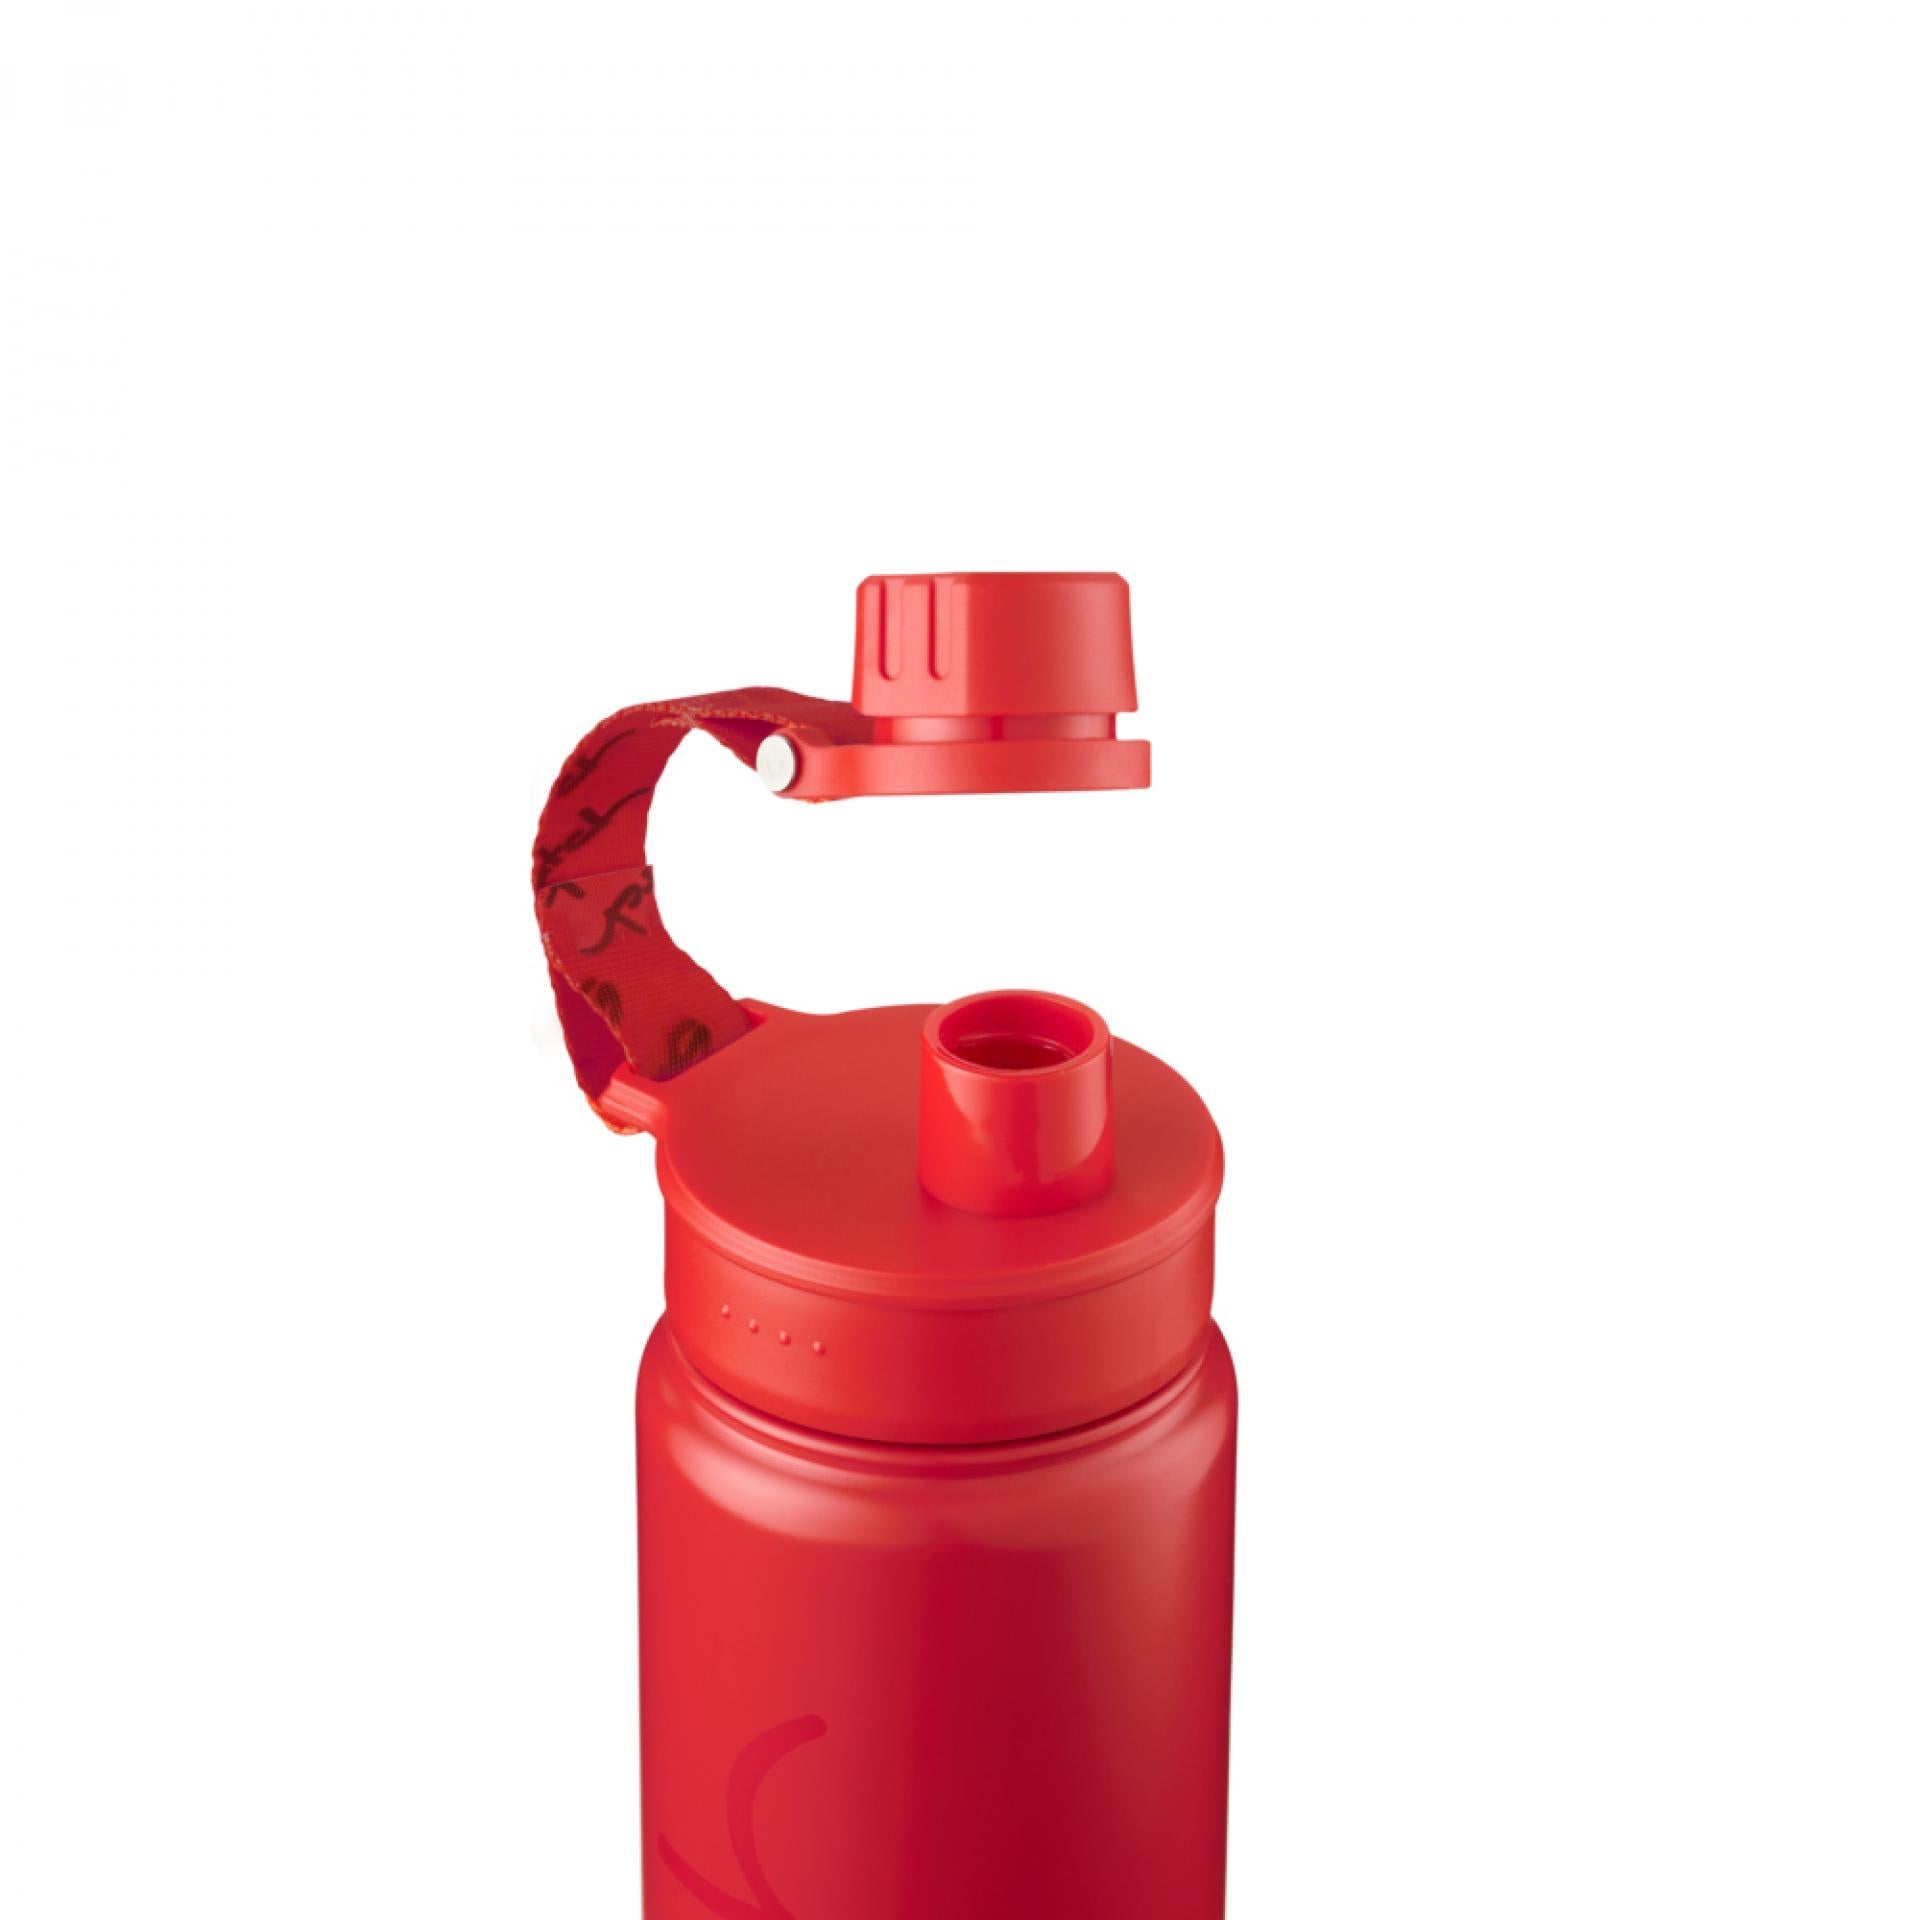 Satch Trinkflasche Edelstahl - Farbe: Rot